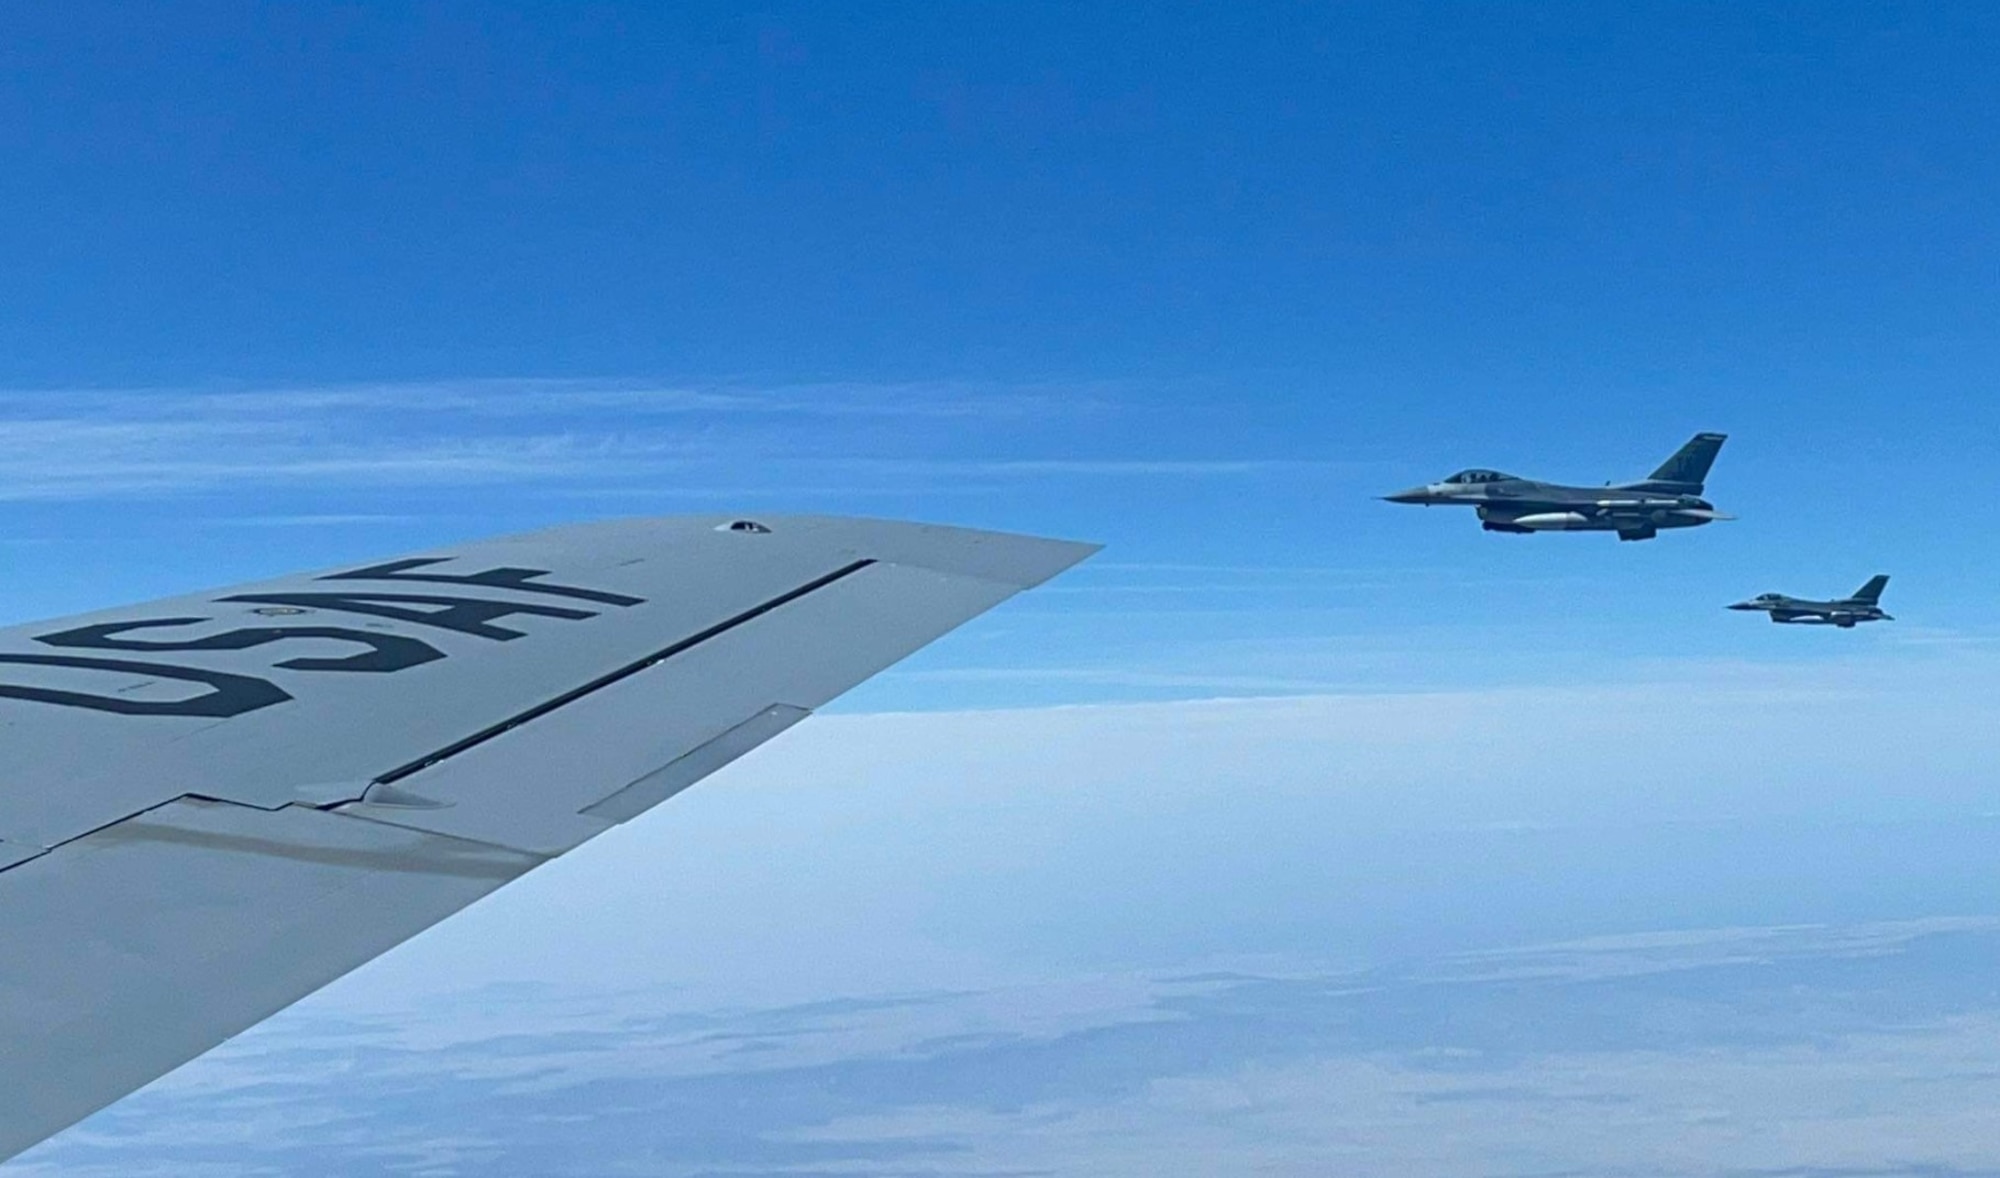 Two F-16 Fighting Falcon aircraft from the 301st Fighter Wing’s 457th Fighter Squadron, Naval Air Station Joint Reserve Base Fort Worth, Texas, fly towards the U.S. Air Force Academy, Colorado Springs, Colo., to honor the legacy of William “Bill” Aaron Gauntt (U.S. Air Force, Lt. Col., ret.), Monday, April 18. Gauntt was a POW who earned numerous accolades, to include three Distinguished Flying Crosses, the Bronze Star with a V for Valor, two Purple Hearts, four Meritorious Service Medals, nine Air Medals, two Air Force Commendation Medals, the POW Medal, the National Defense Medal and the Vietnam Service Medal. (Courtesy Photo)